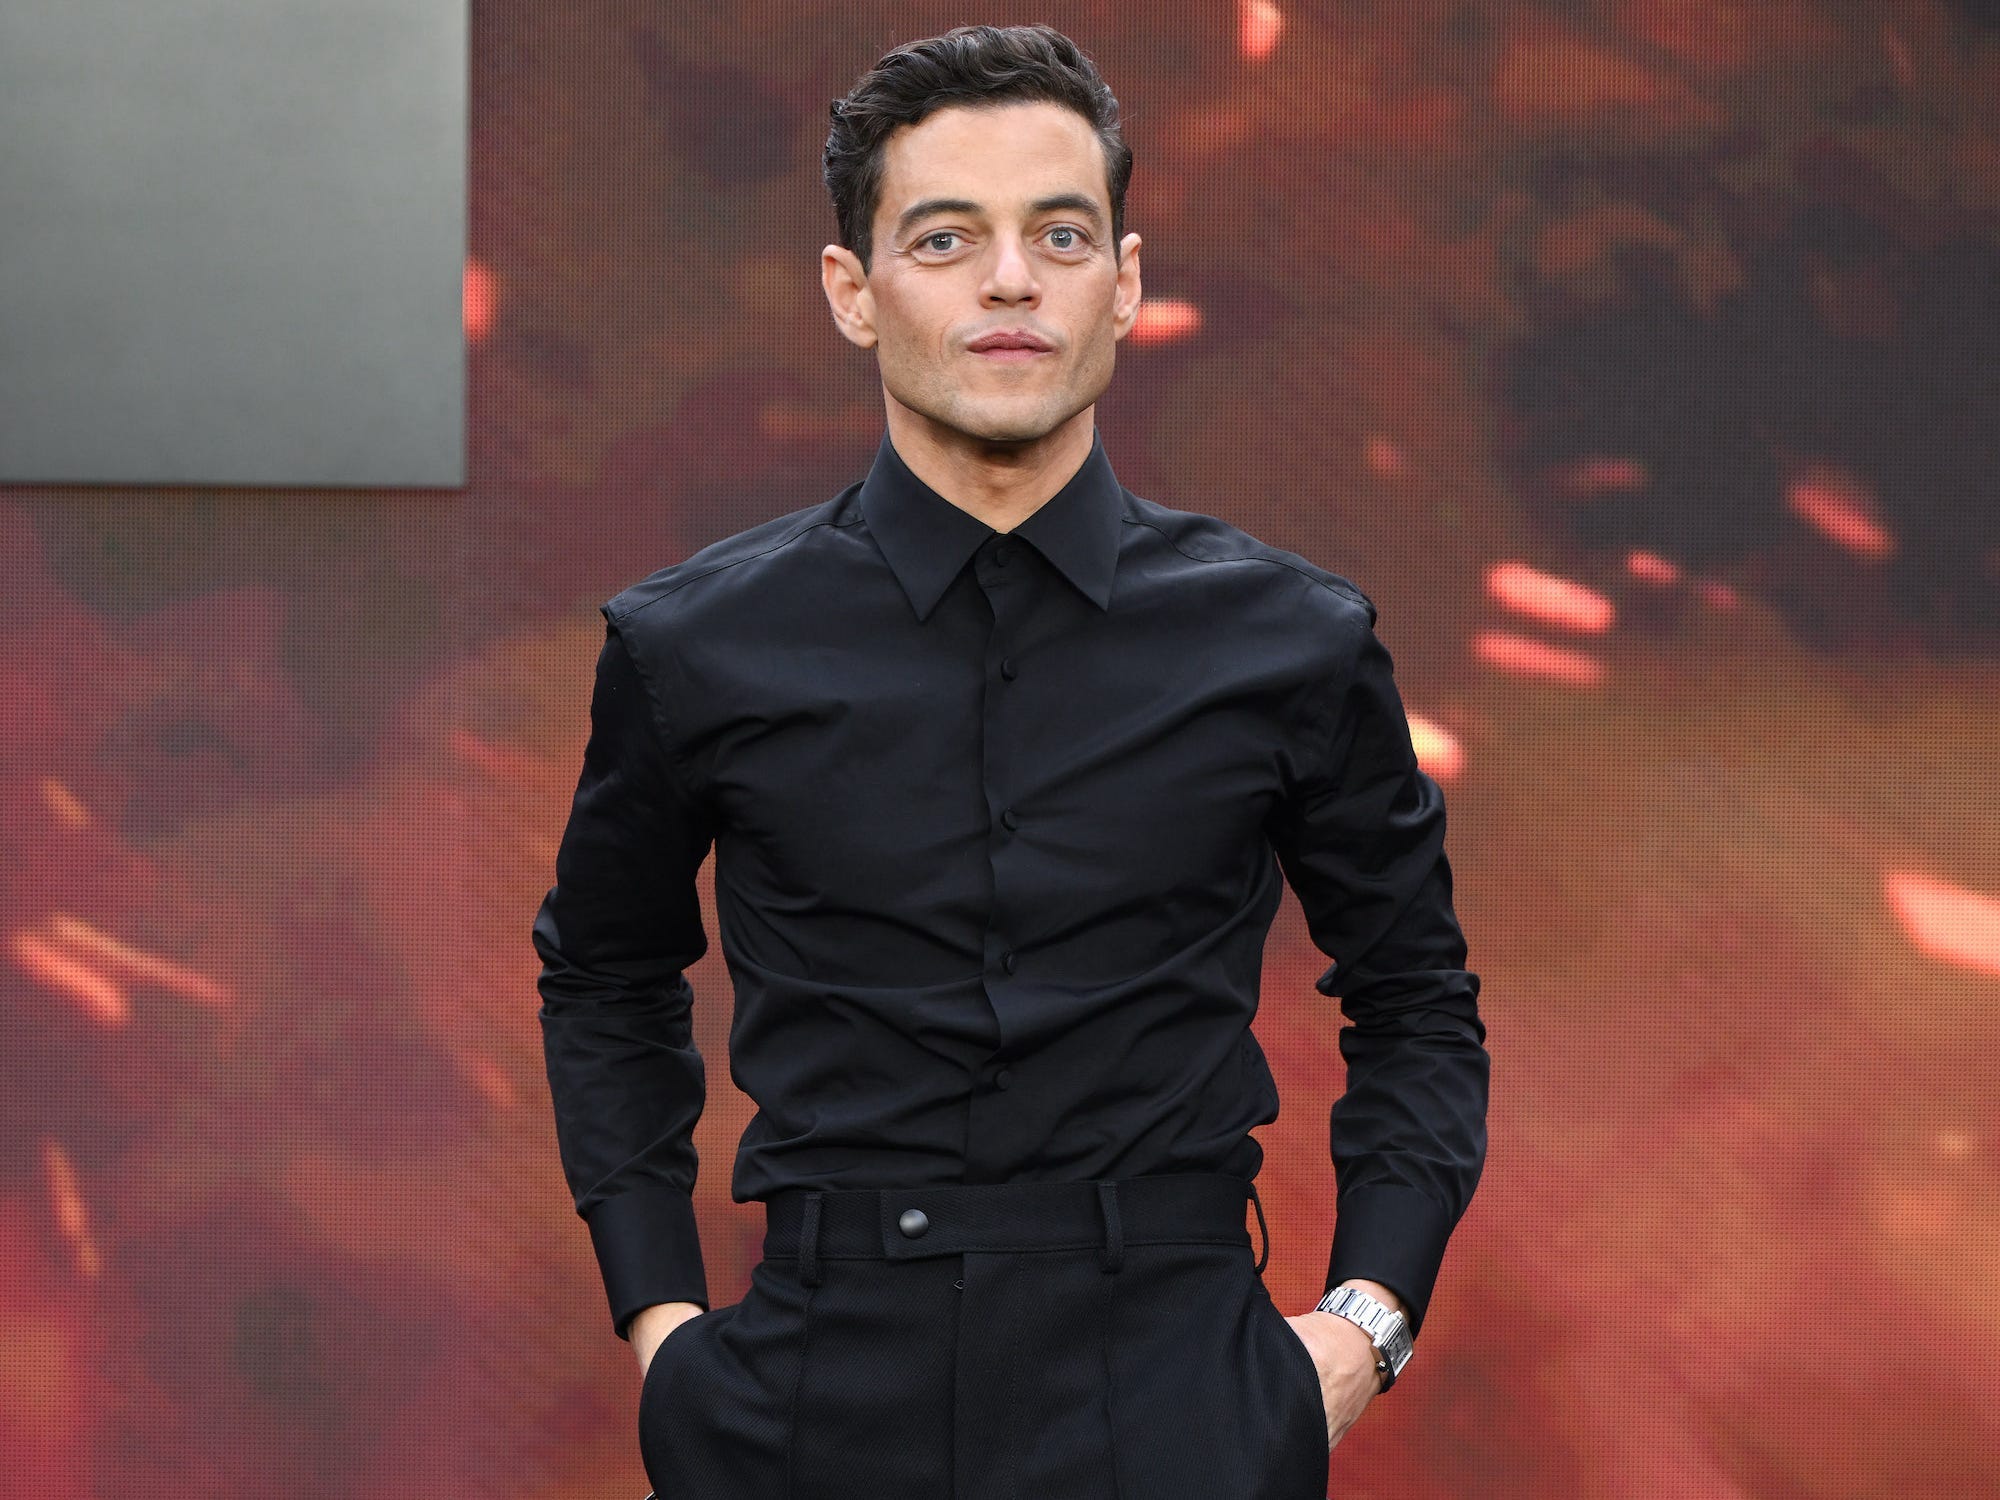 <p><a href="https://www.empireonline.com/movies/news/rami-malek-starring-in-cia-thriller-the-amateur/">The spy thriller</a> stars Rami Malek as a CIA cryptographer who loses his wife in a terrorist attack. When the agency won't go after her killer due to an internal conflict, Malek's character blackmails the CIA.</p><p>Rachel Brosnahan, Laurence Fishburne, and Julianne Nicholson also star.</p>